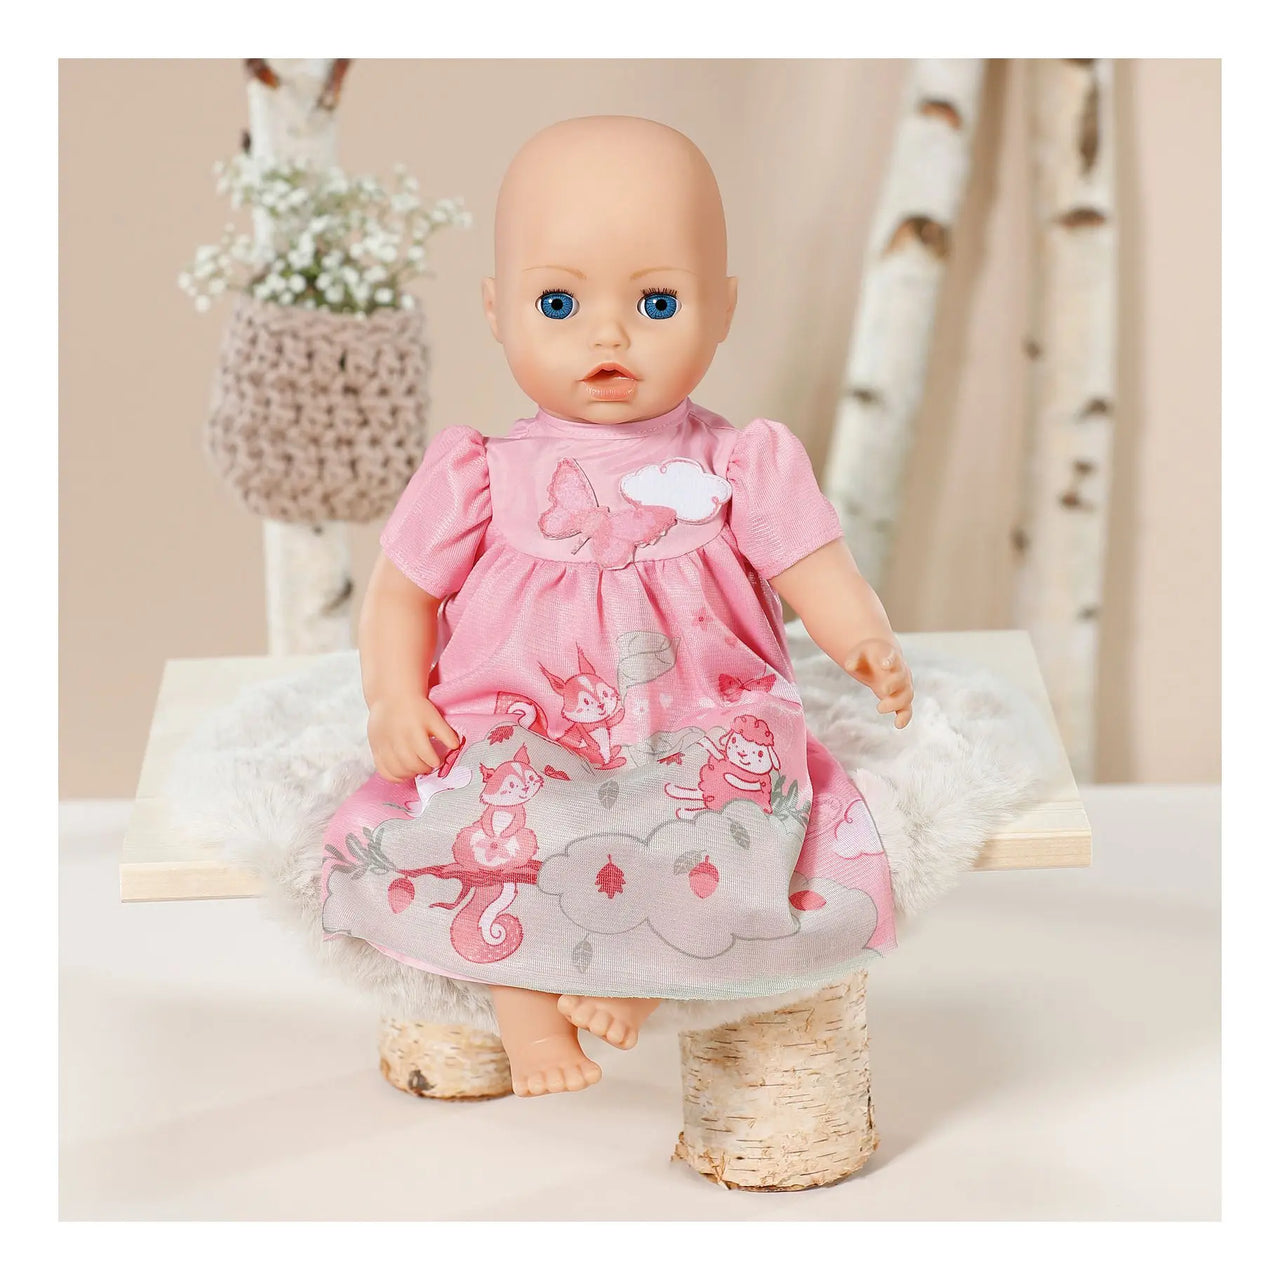 Baby Annabell Pink Dress 43cm Baby Annabell